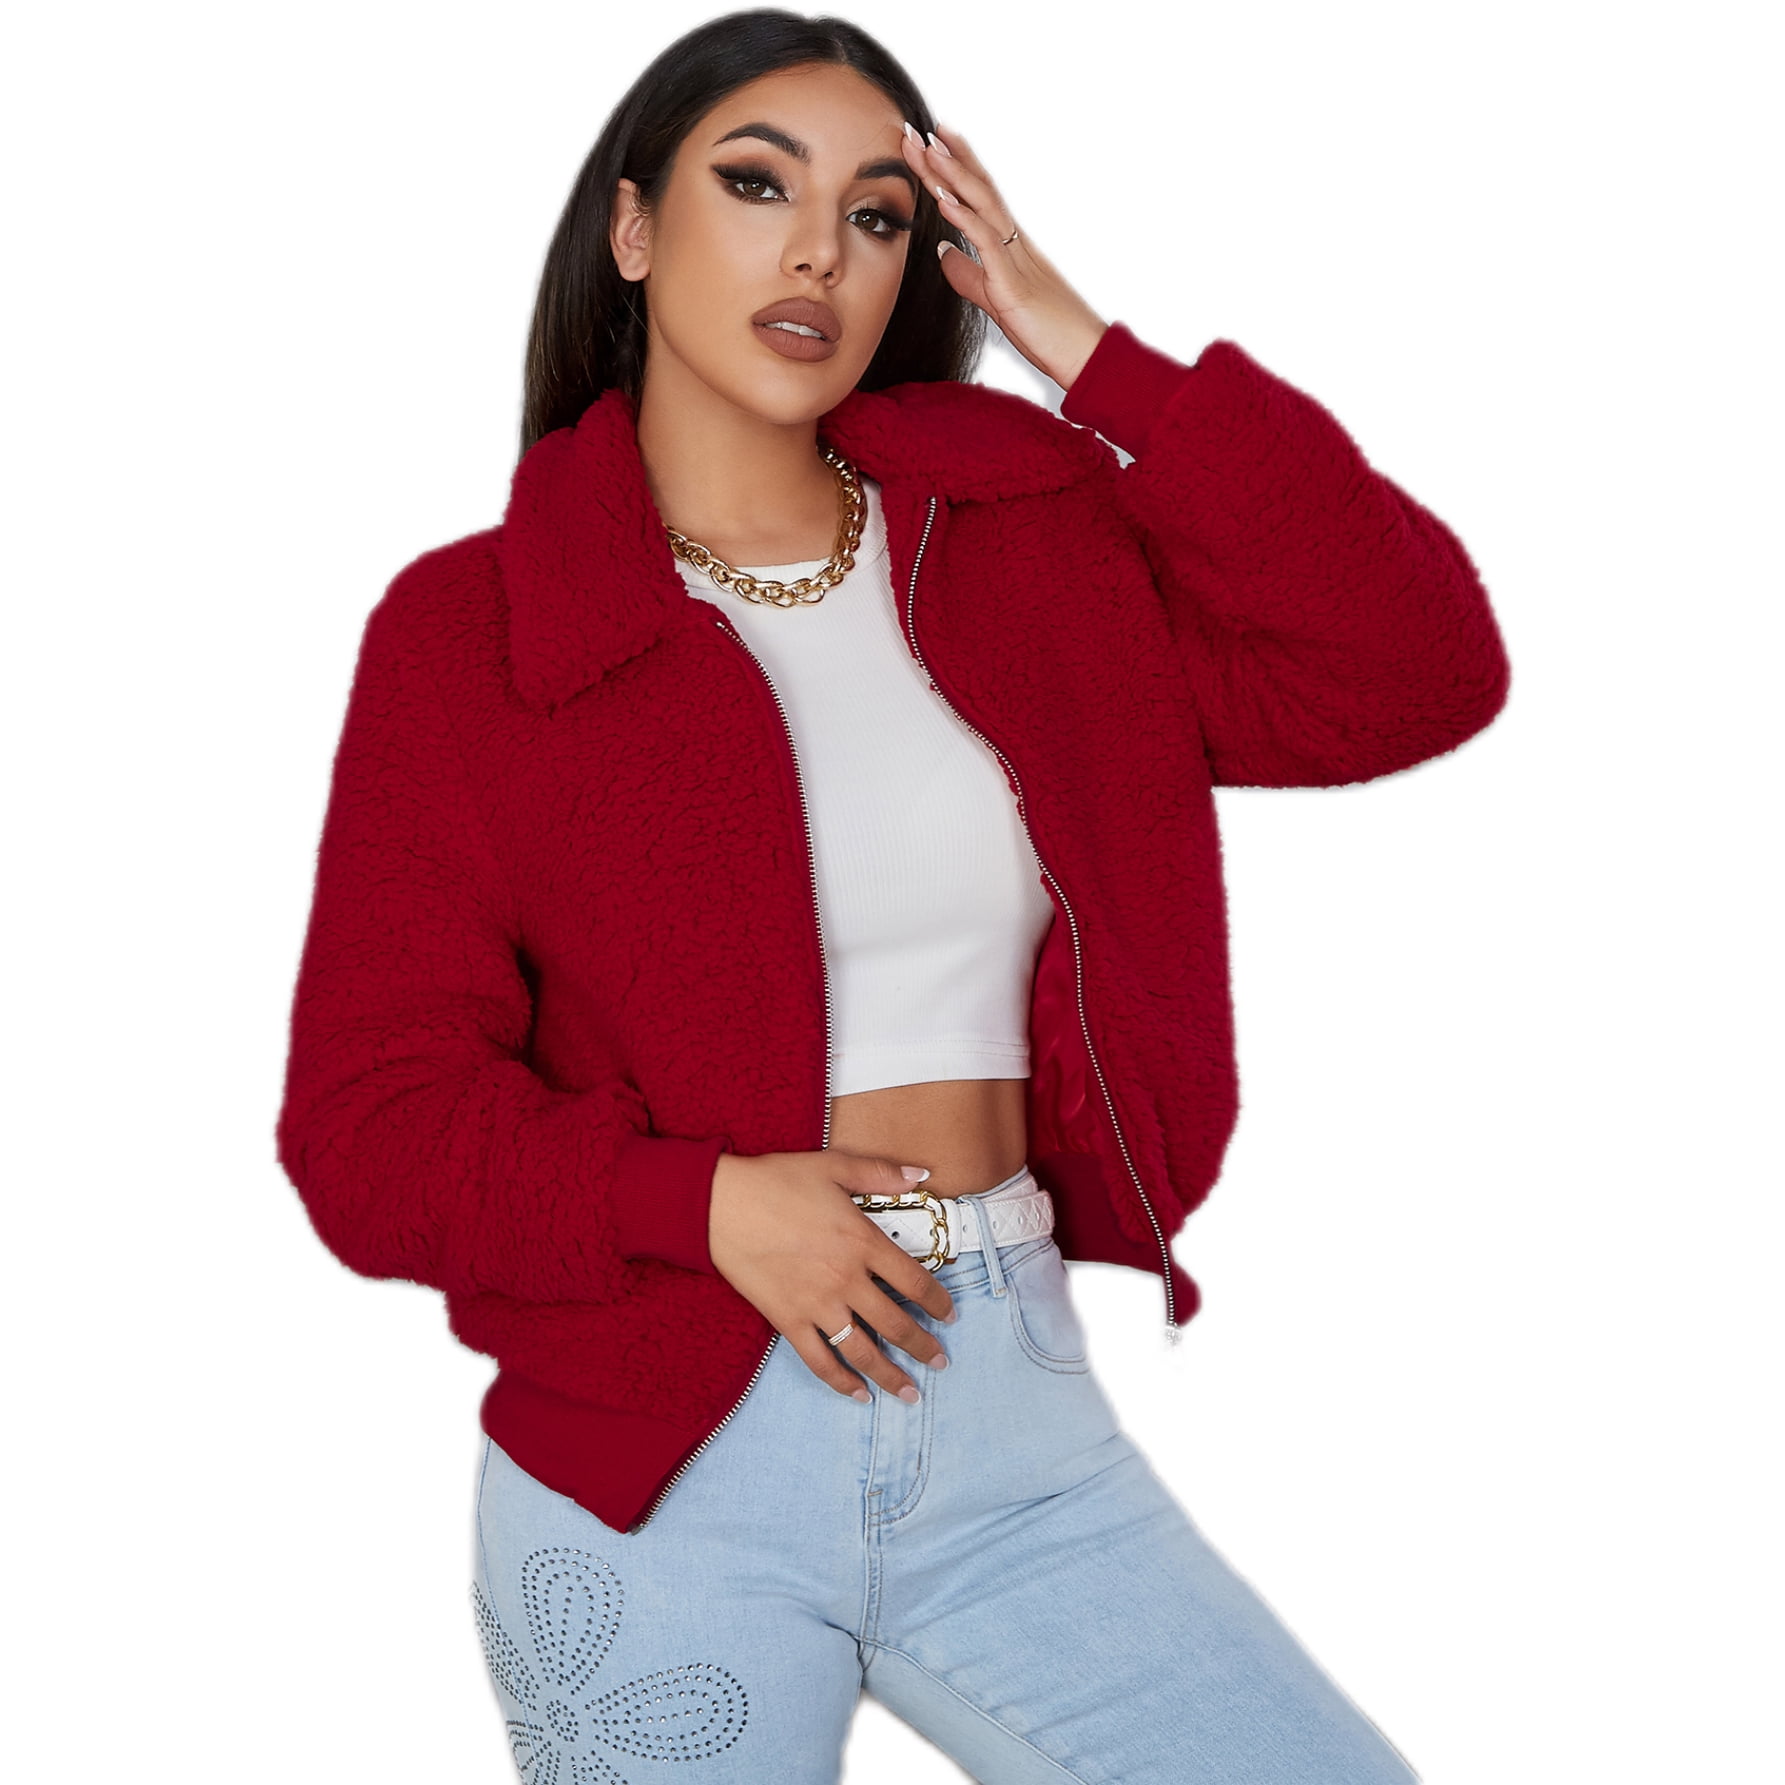 EILLY BAZAR Zip Up Teddy Jacket for Women Long Sleeve Female Crop Length  Red Jacket S